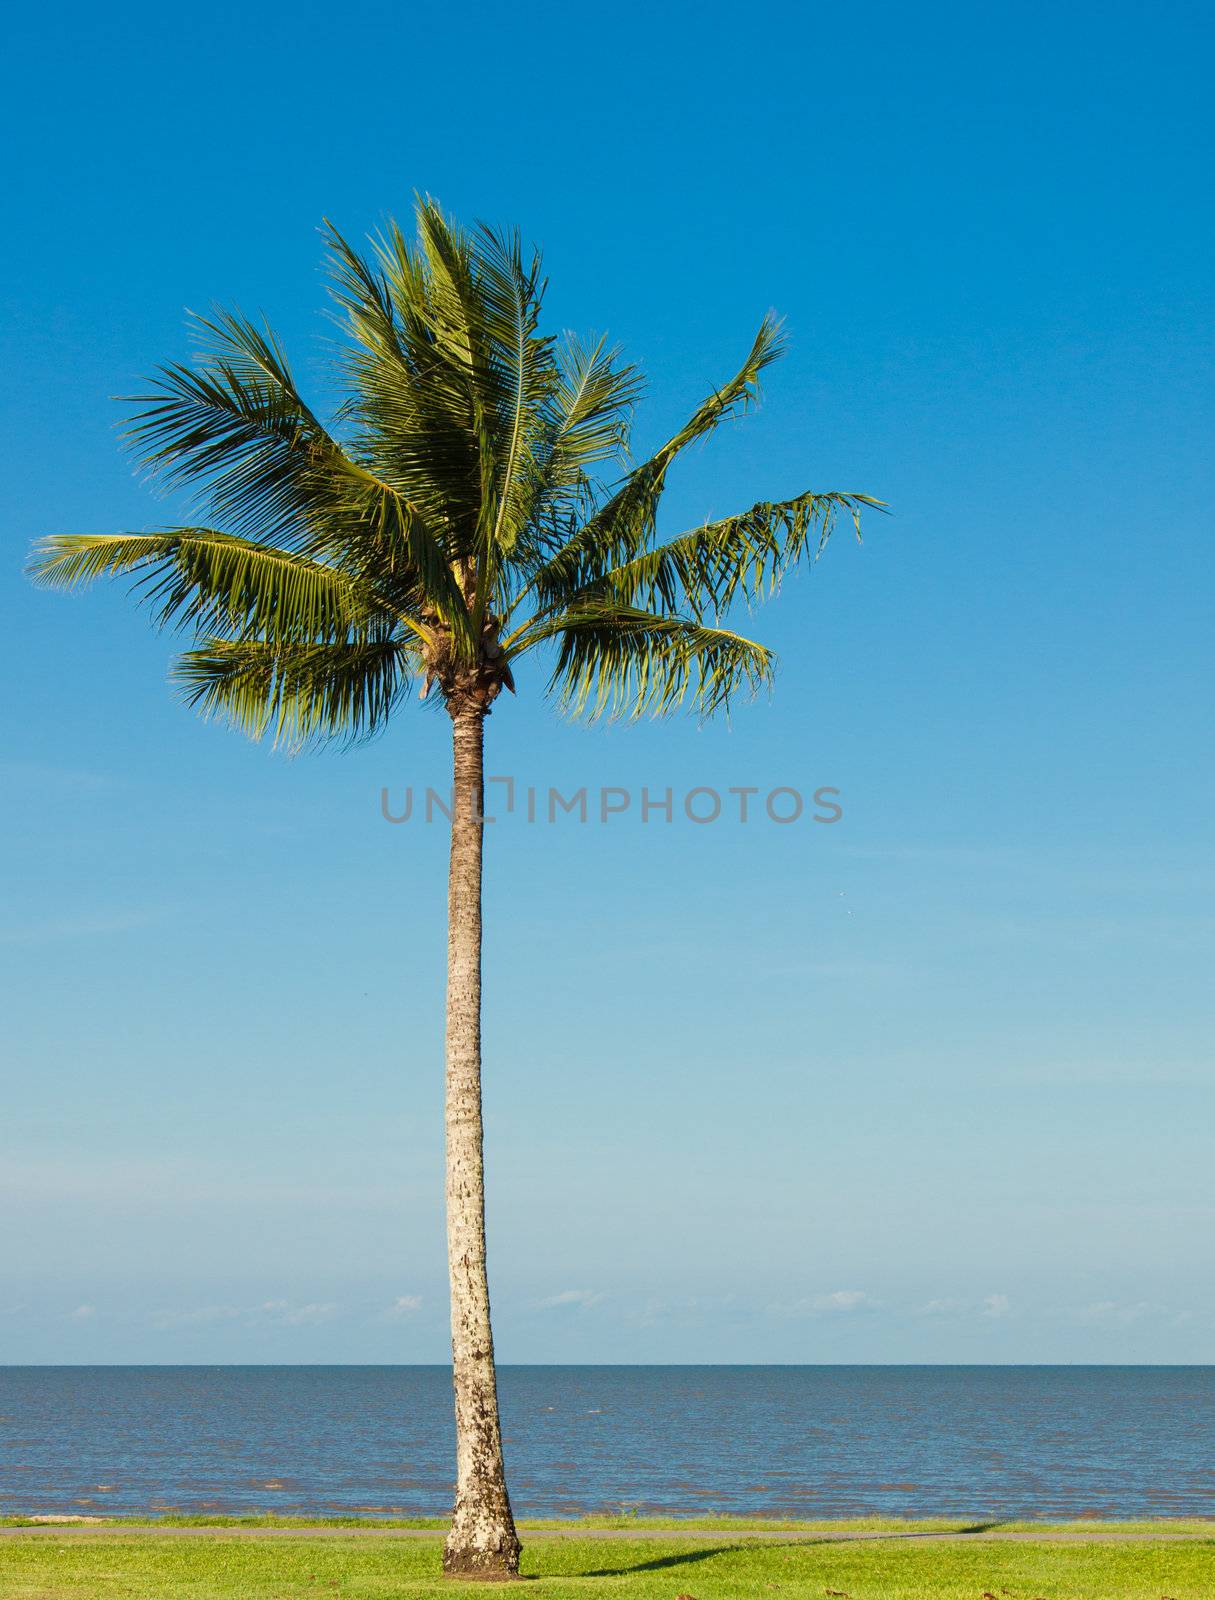 A lone coconut tree on a tropical beach front with a lovely blue sky in the background.